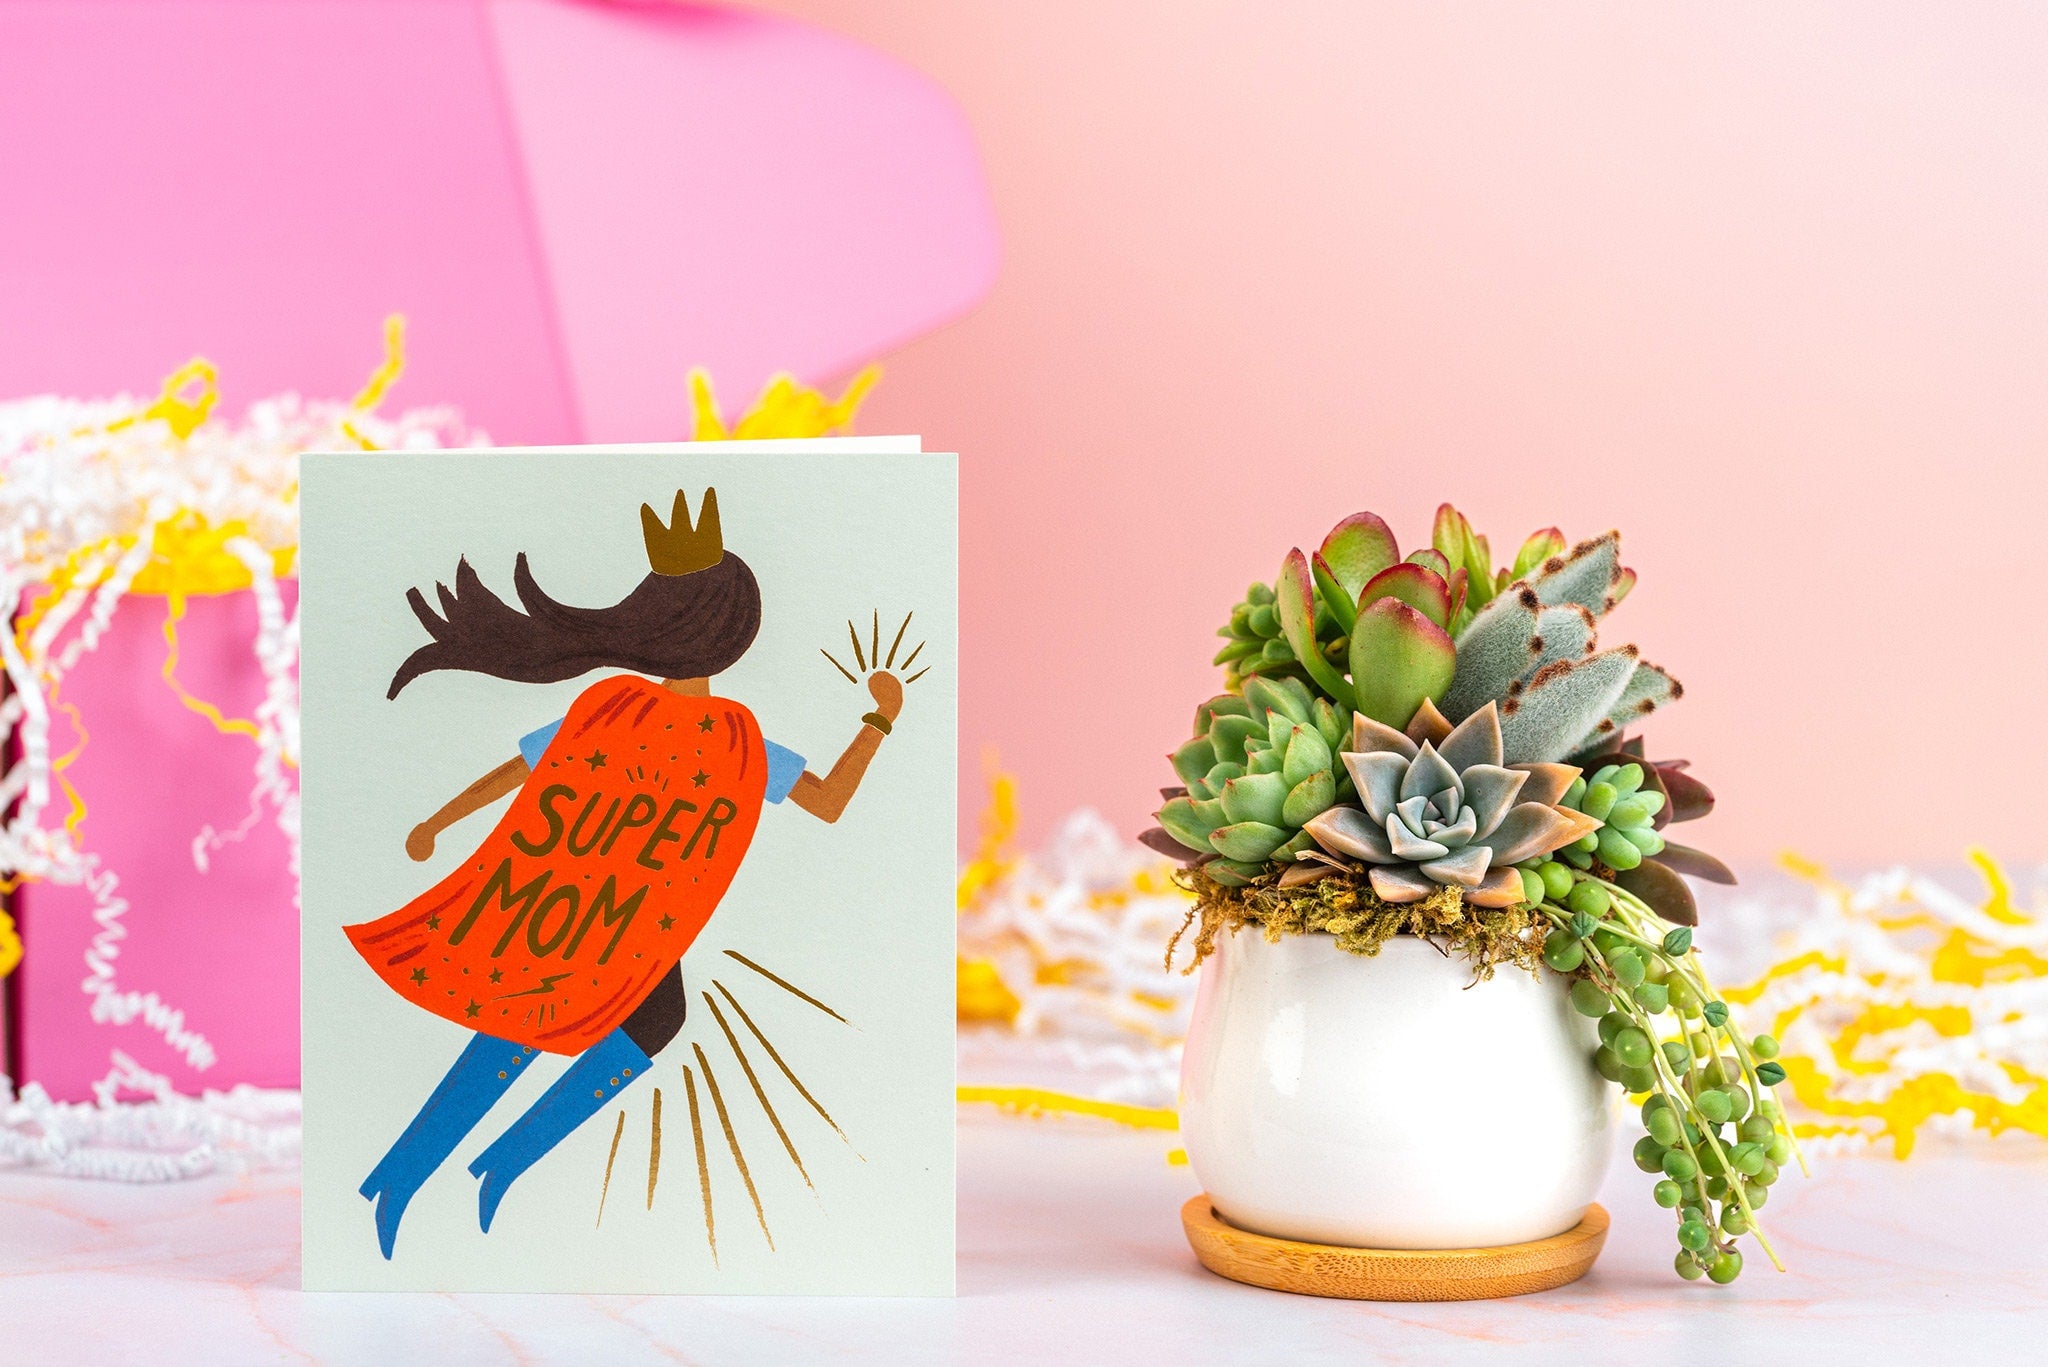 Flying Super Mom | Mother's Day Succulent Arrangement Gift Box | Care Package for Mom, Sister, or Friend